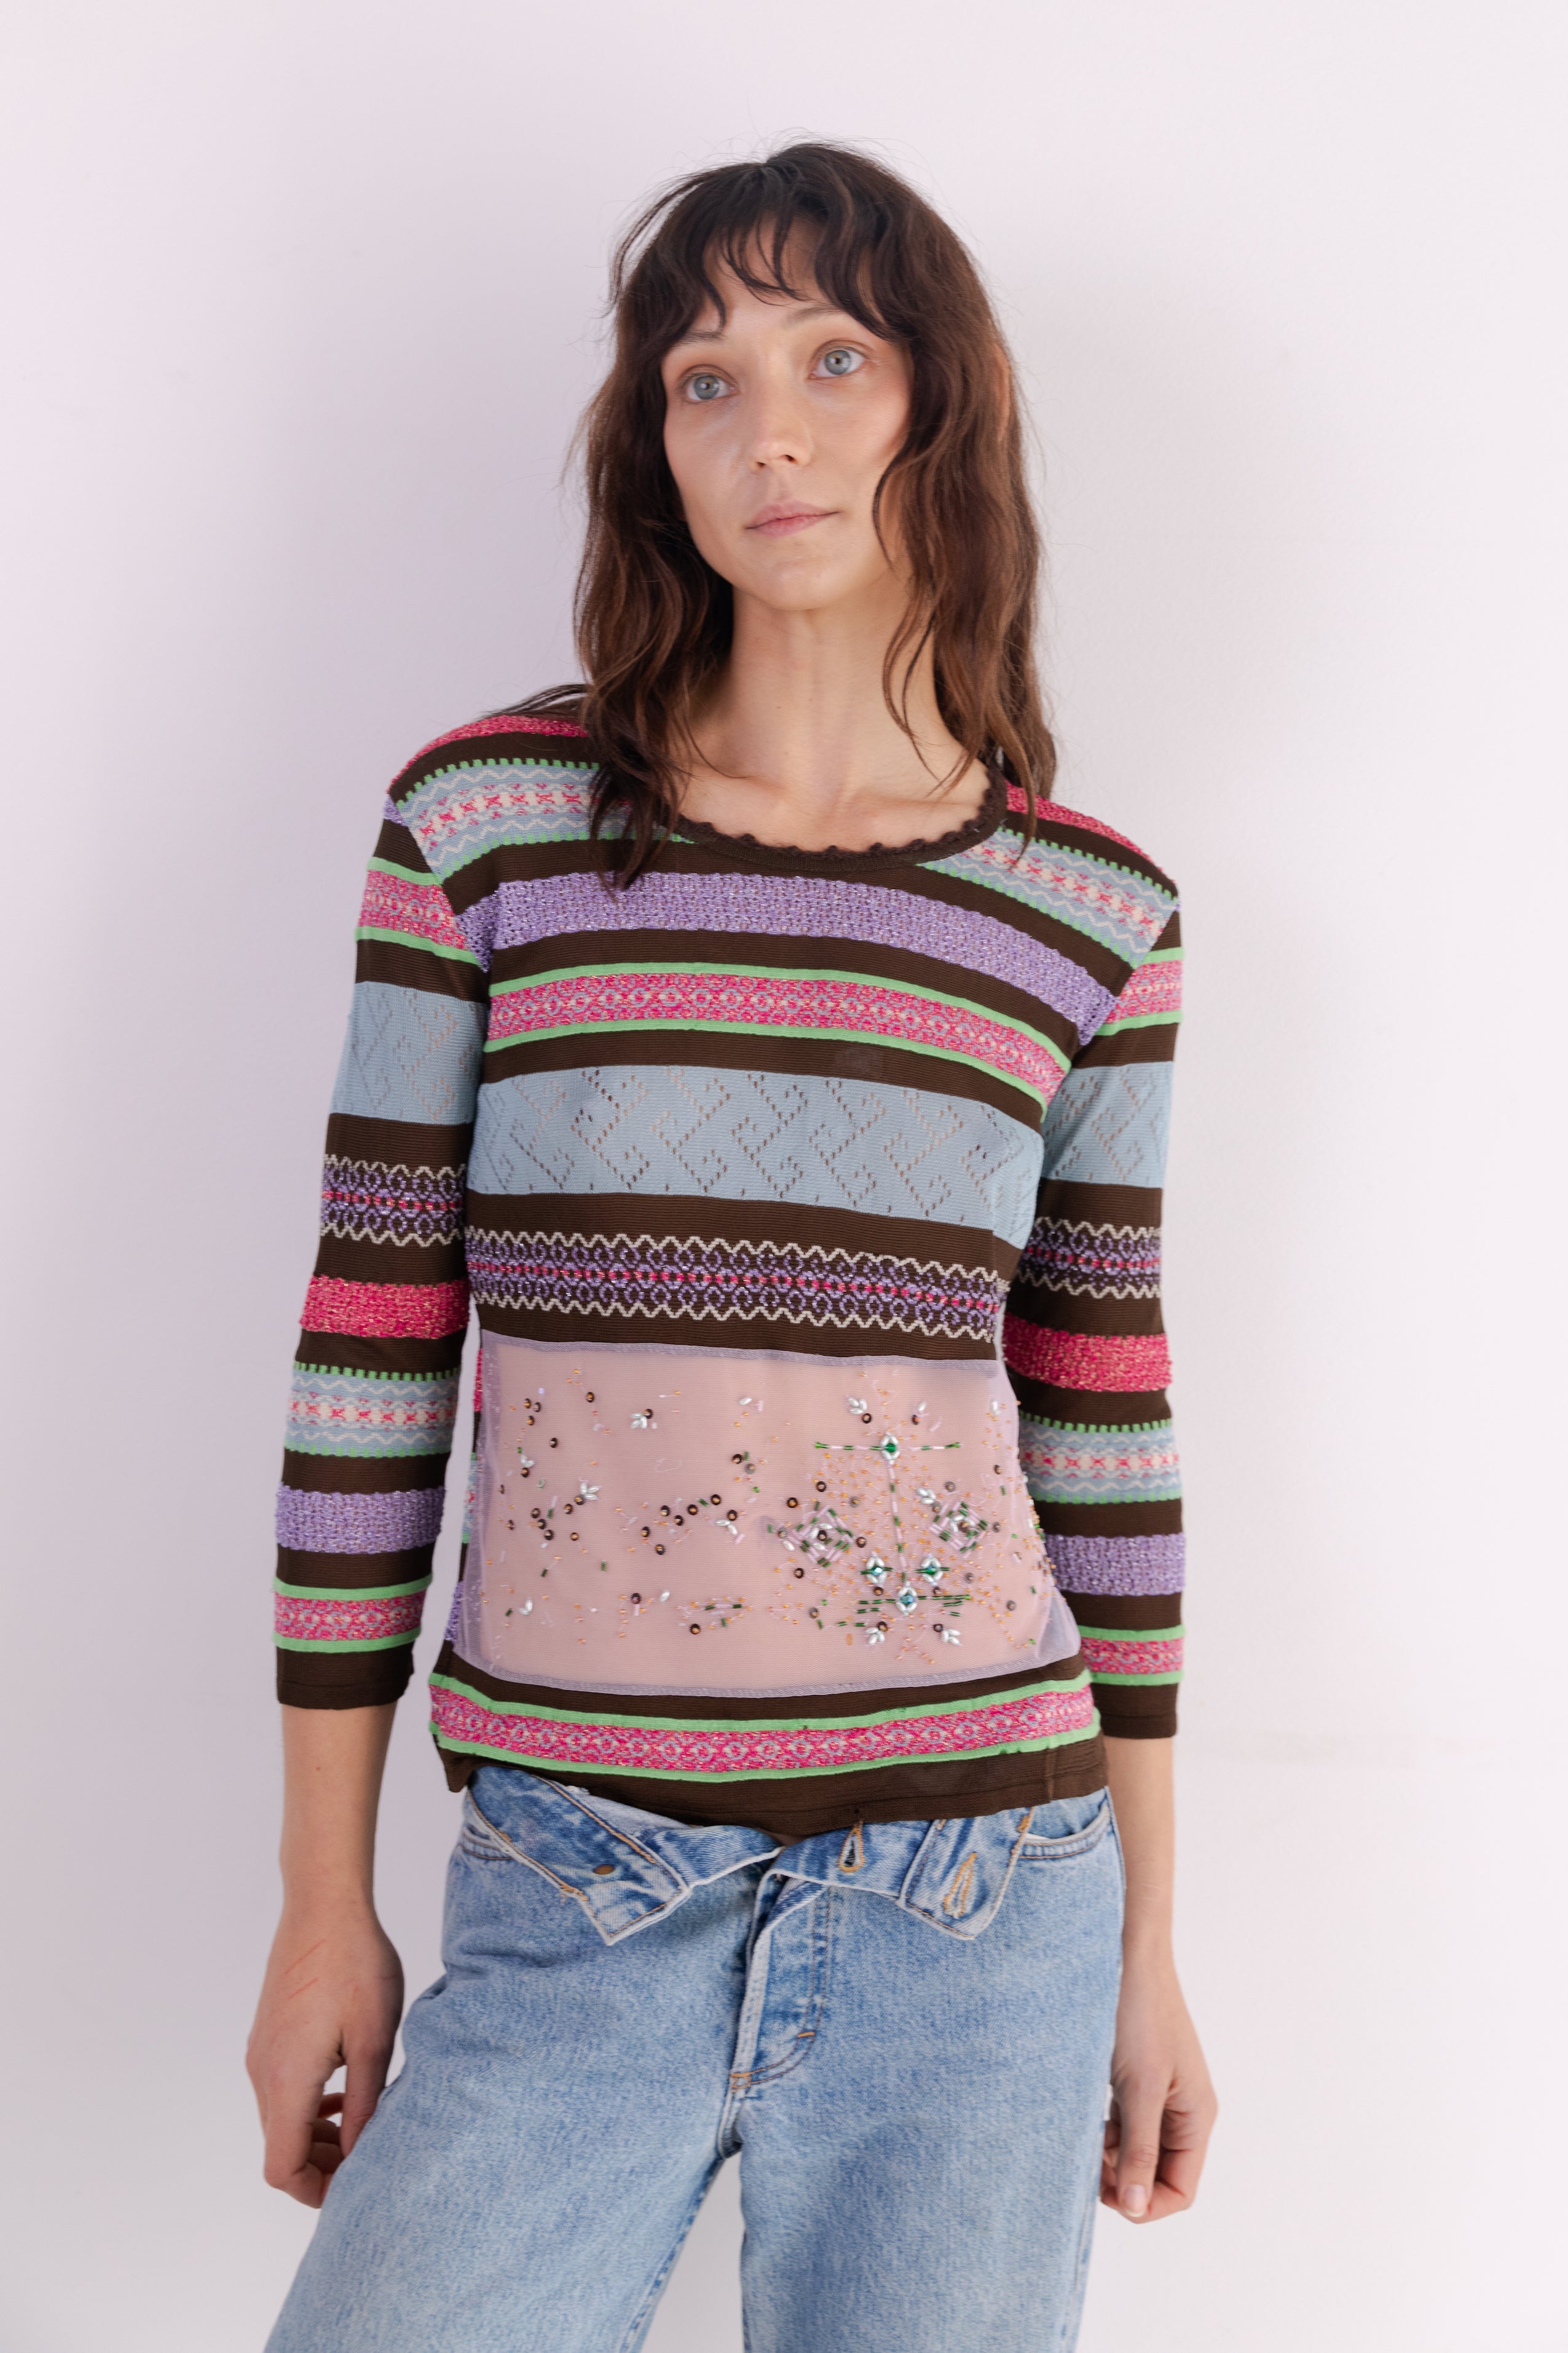 Christian Lacroix <br> Y2K Bazar patterned knit sheer tummy sweater